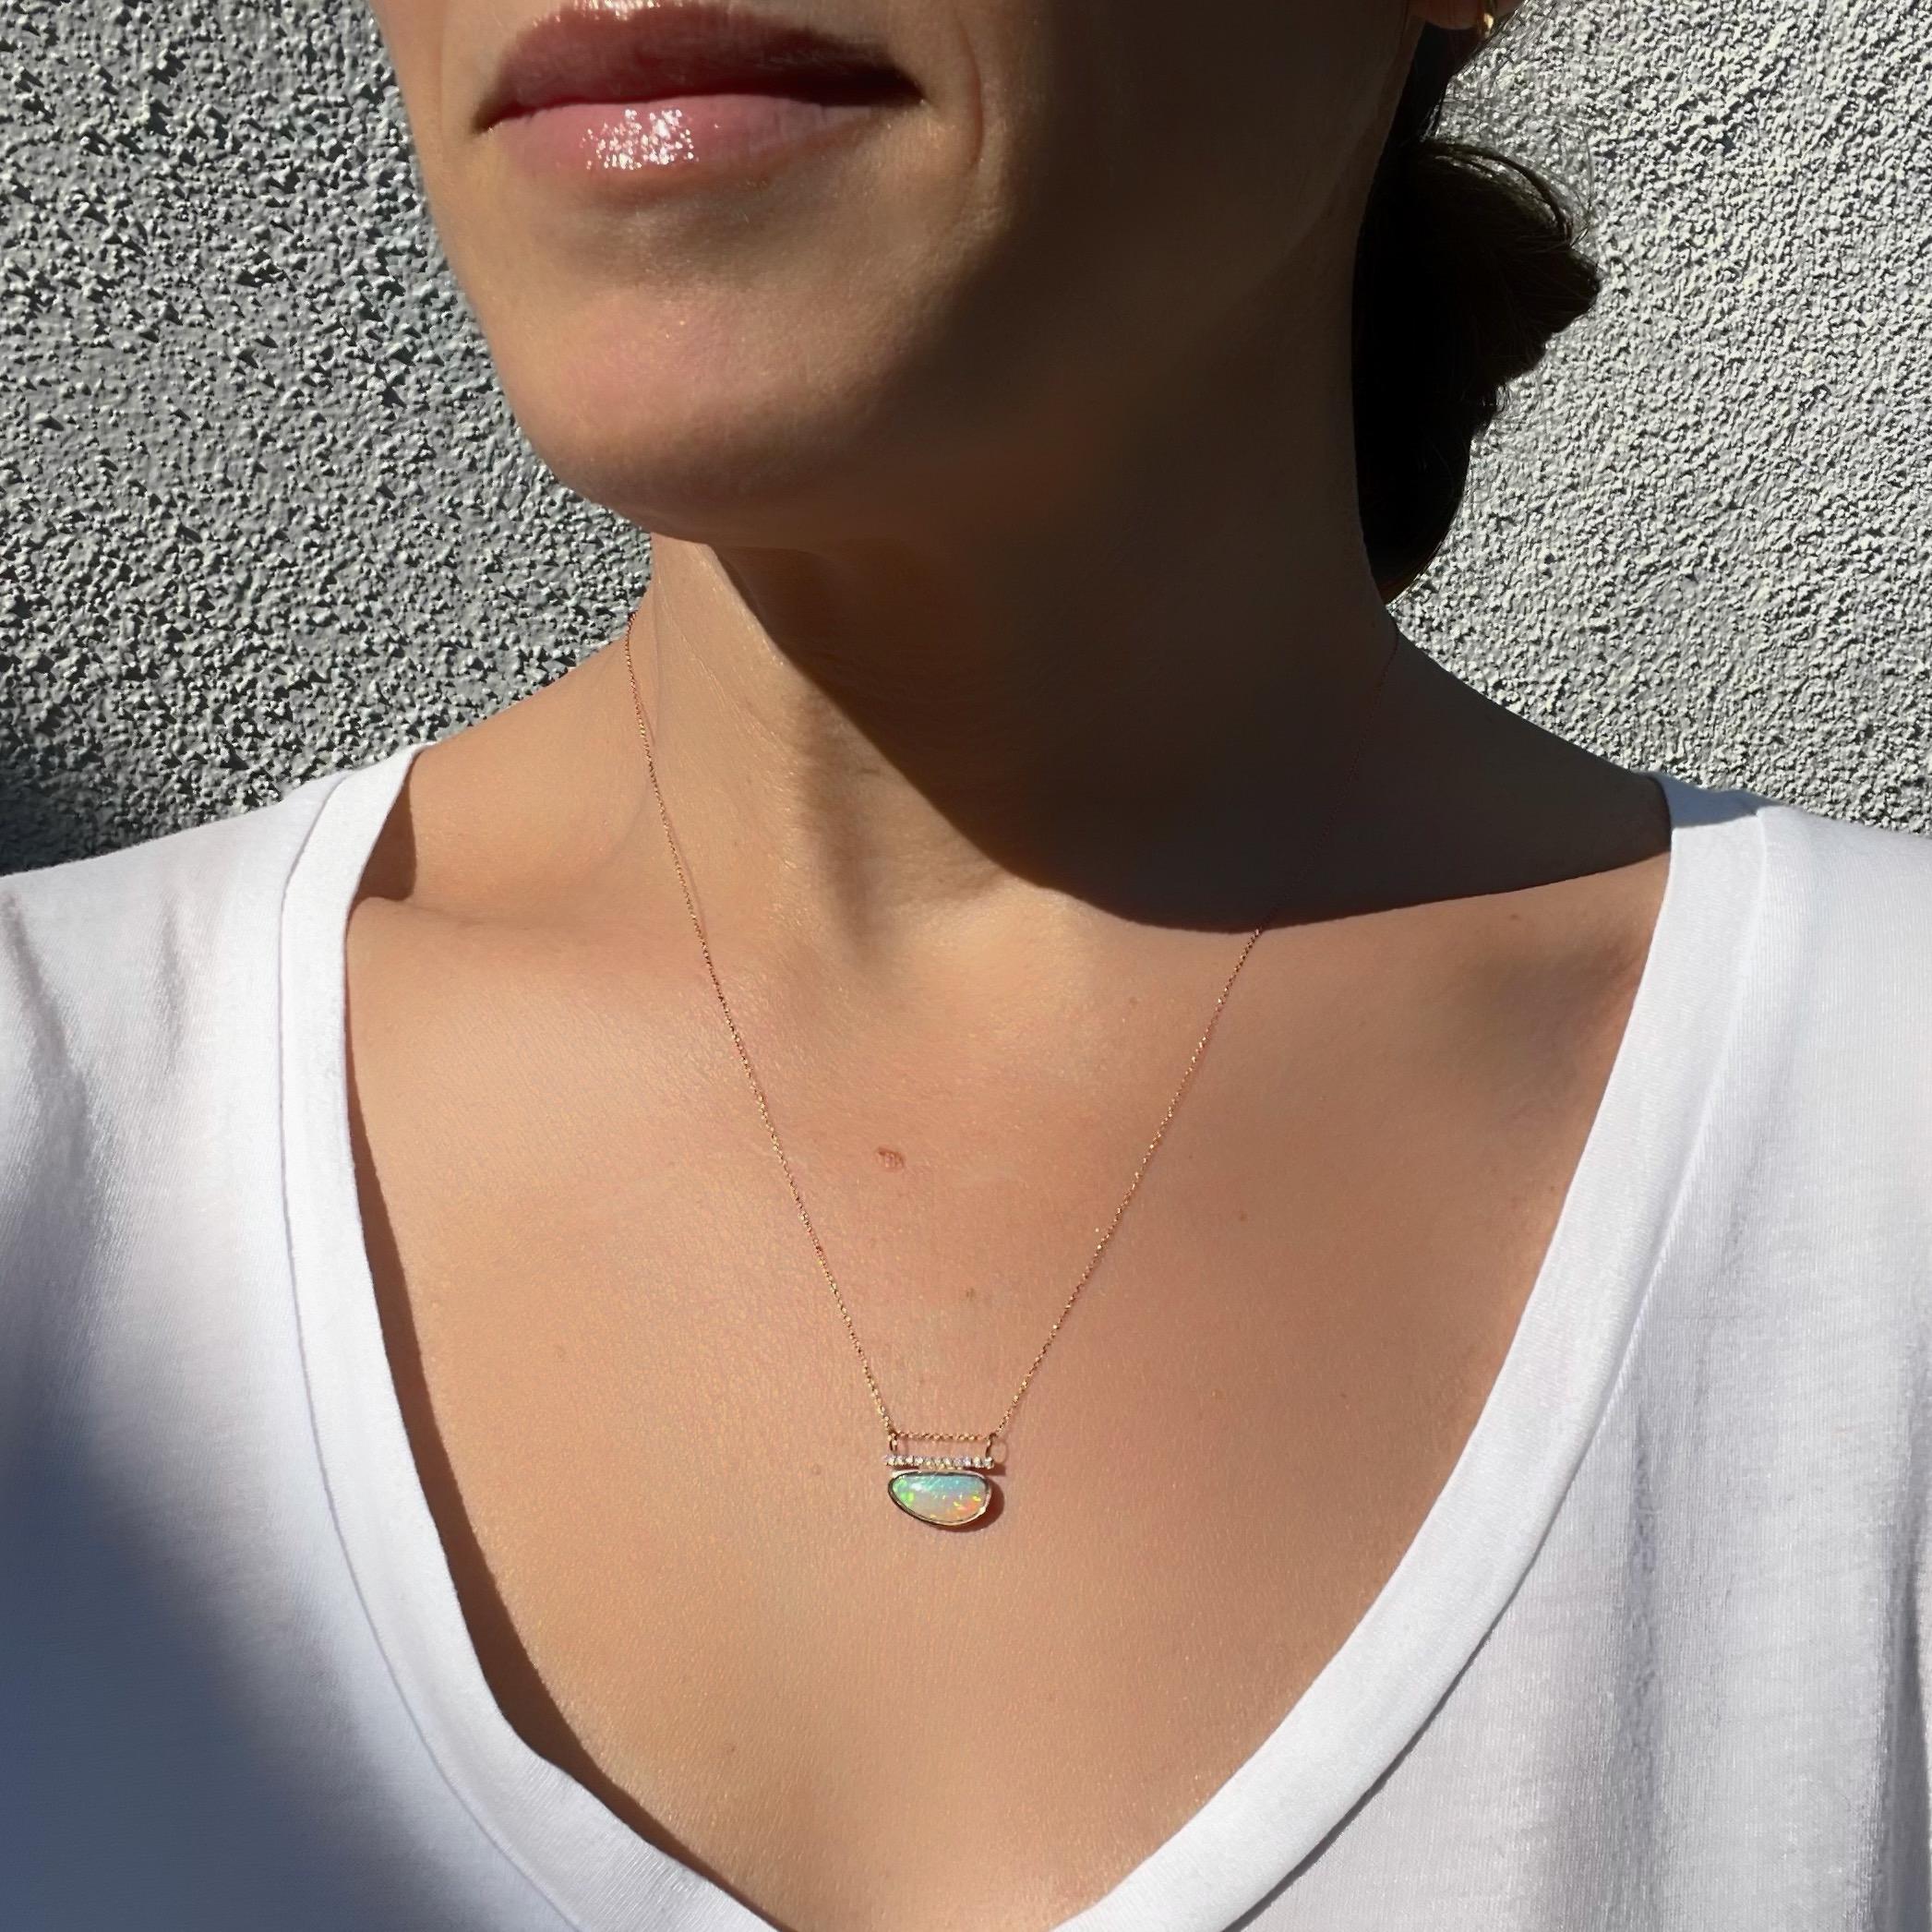 Head in the Clouds Crystal Opal Necklace No. 16 with Diamonds by NIXIN Jewelry For Sale 4